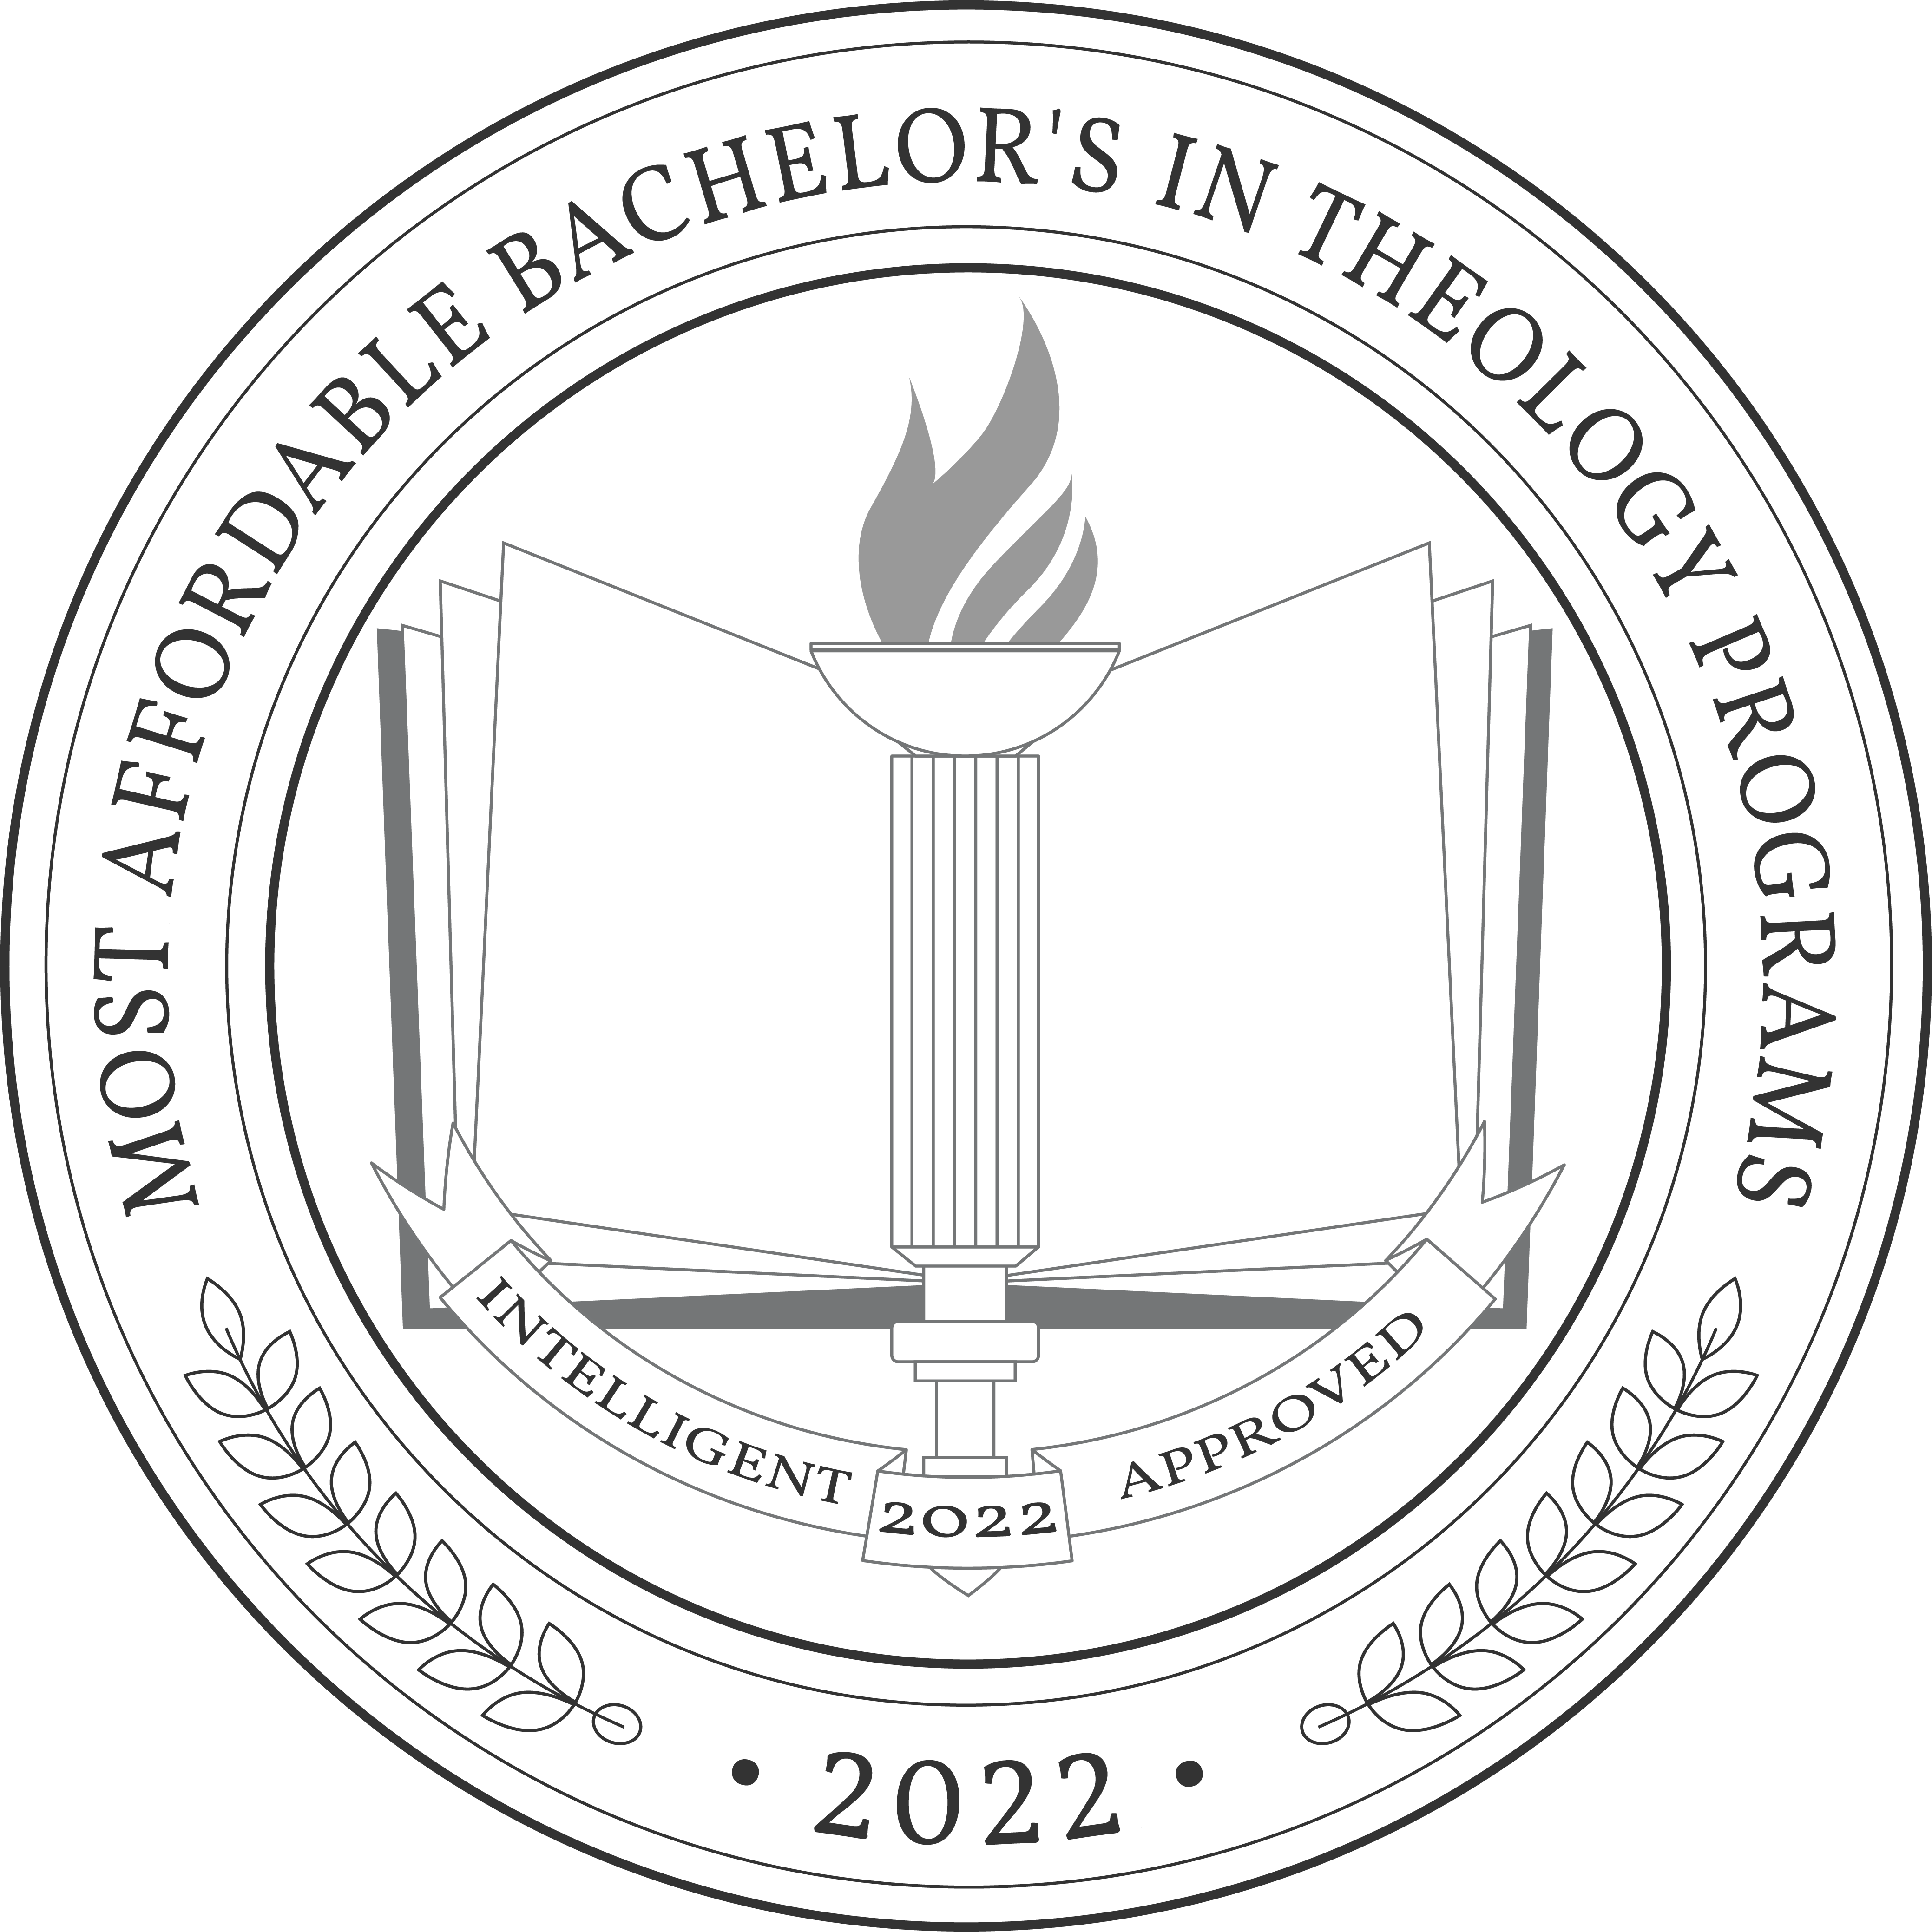 Most Affordable Bachelor's in Theology Programs Badge